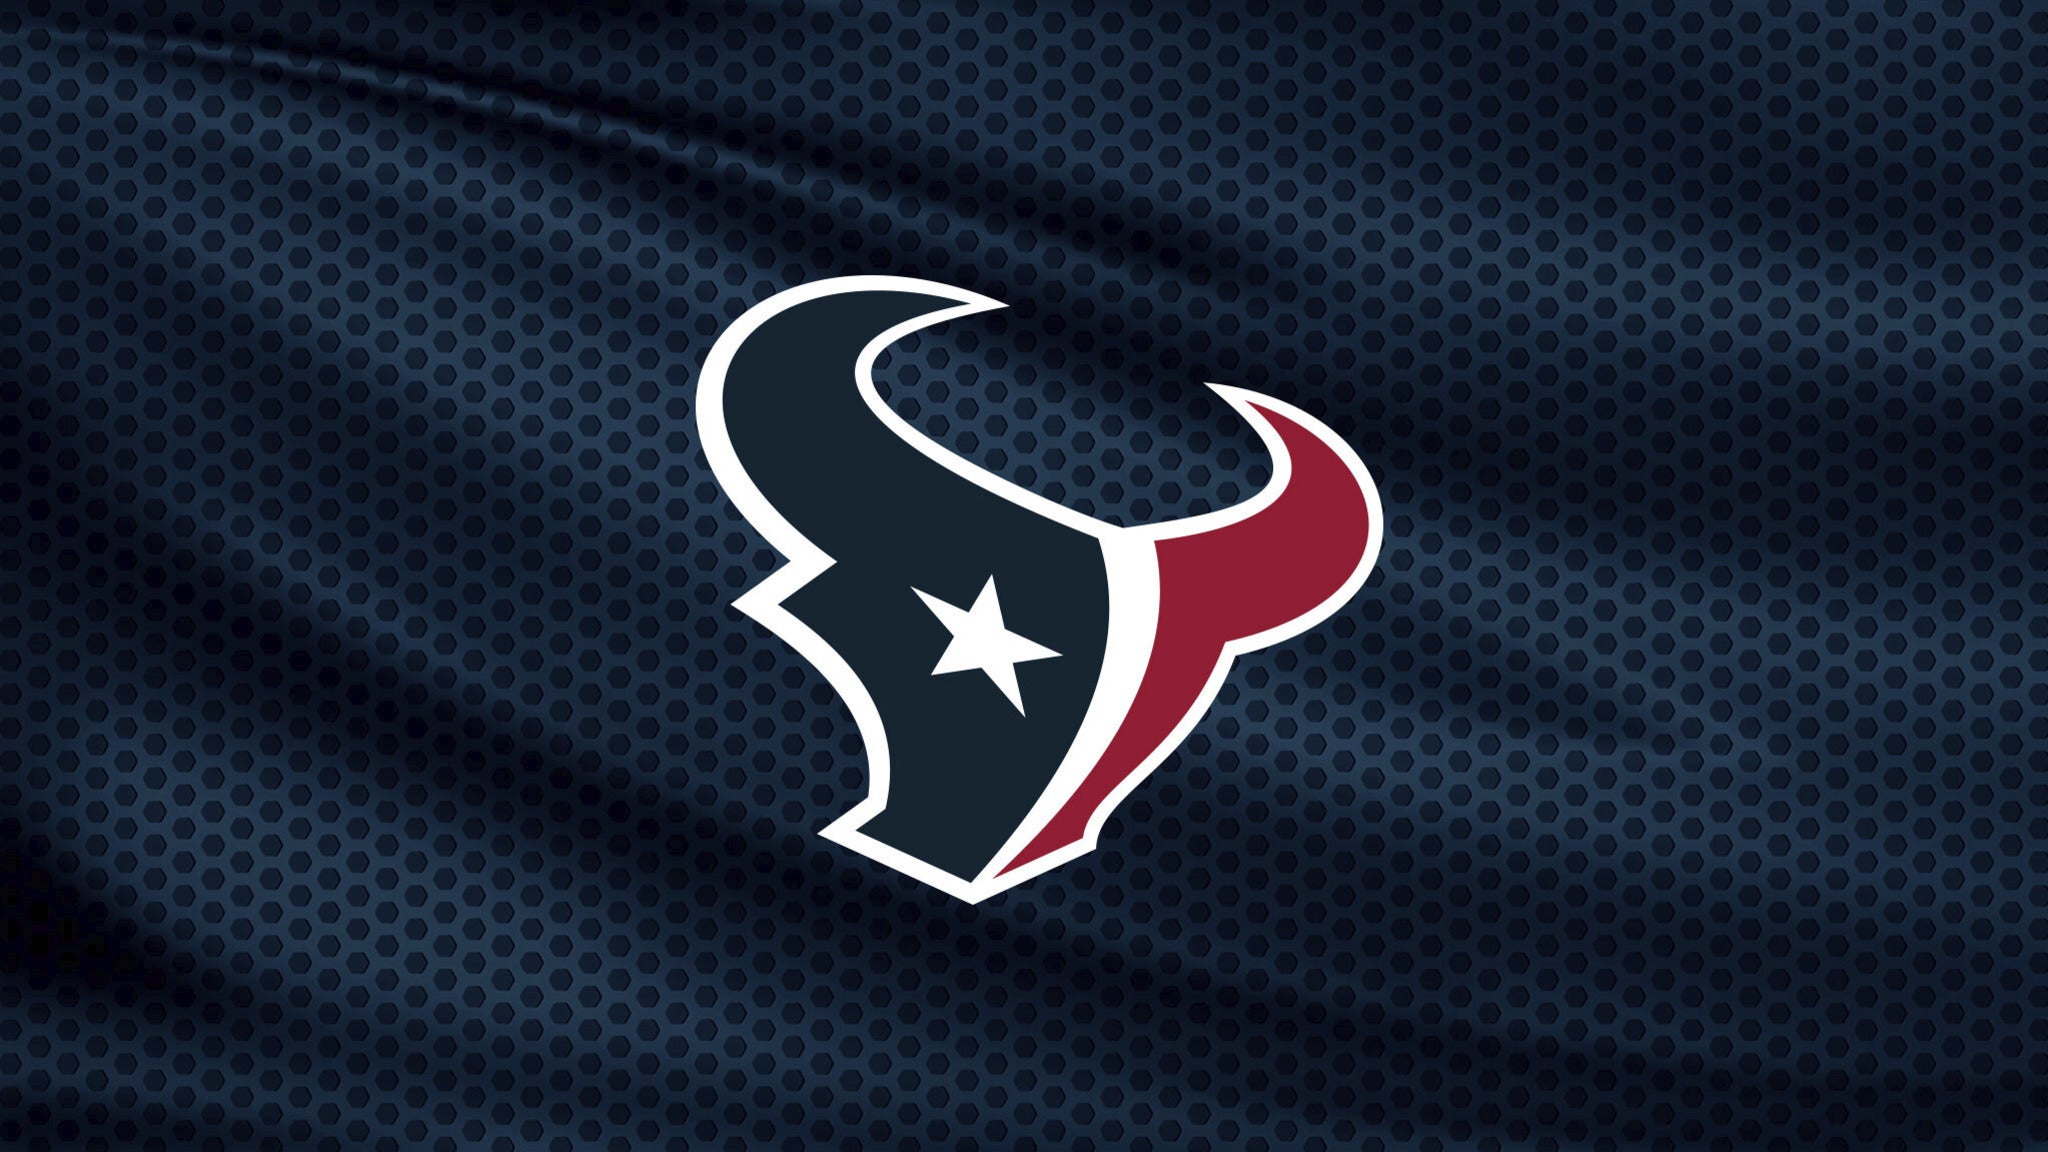 texans home tickets